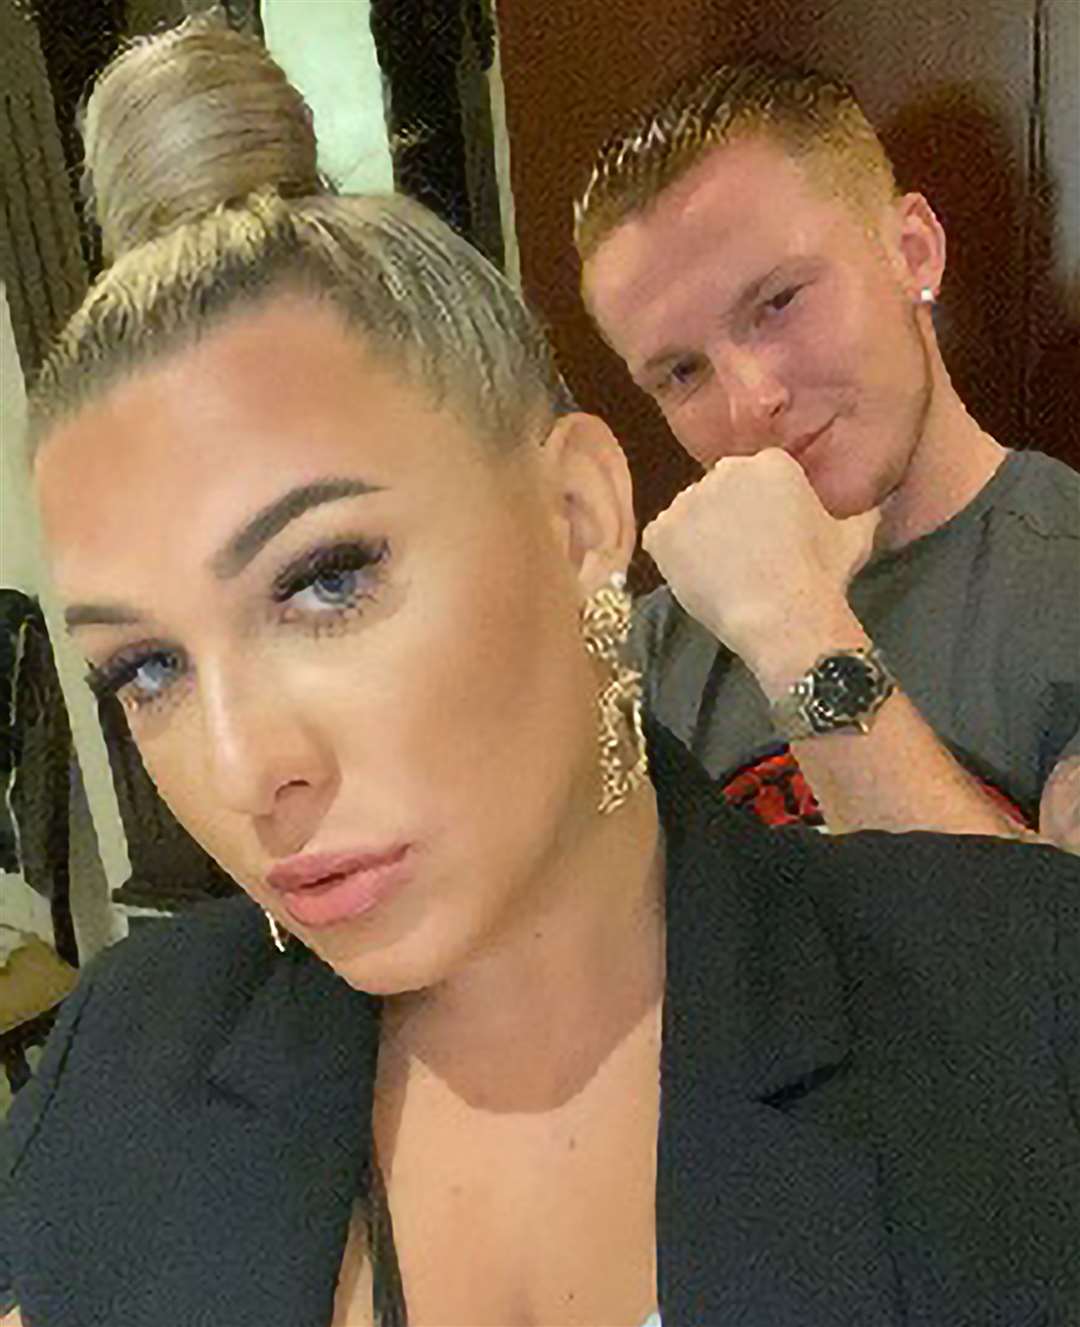 Georgia Haynes and her boyfriend Bradley on holiday in Corfu amid the passport ordeal which threatened her coming home. Picture: Georgia Haynes